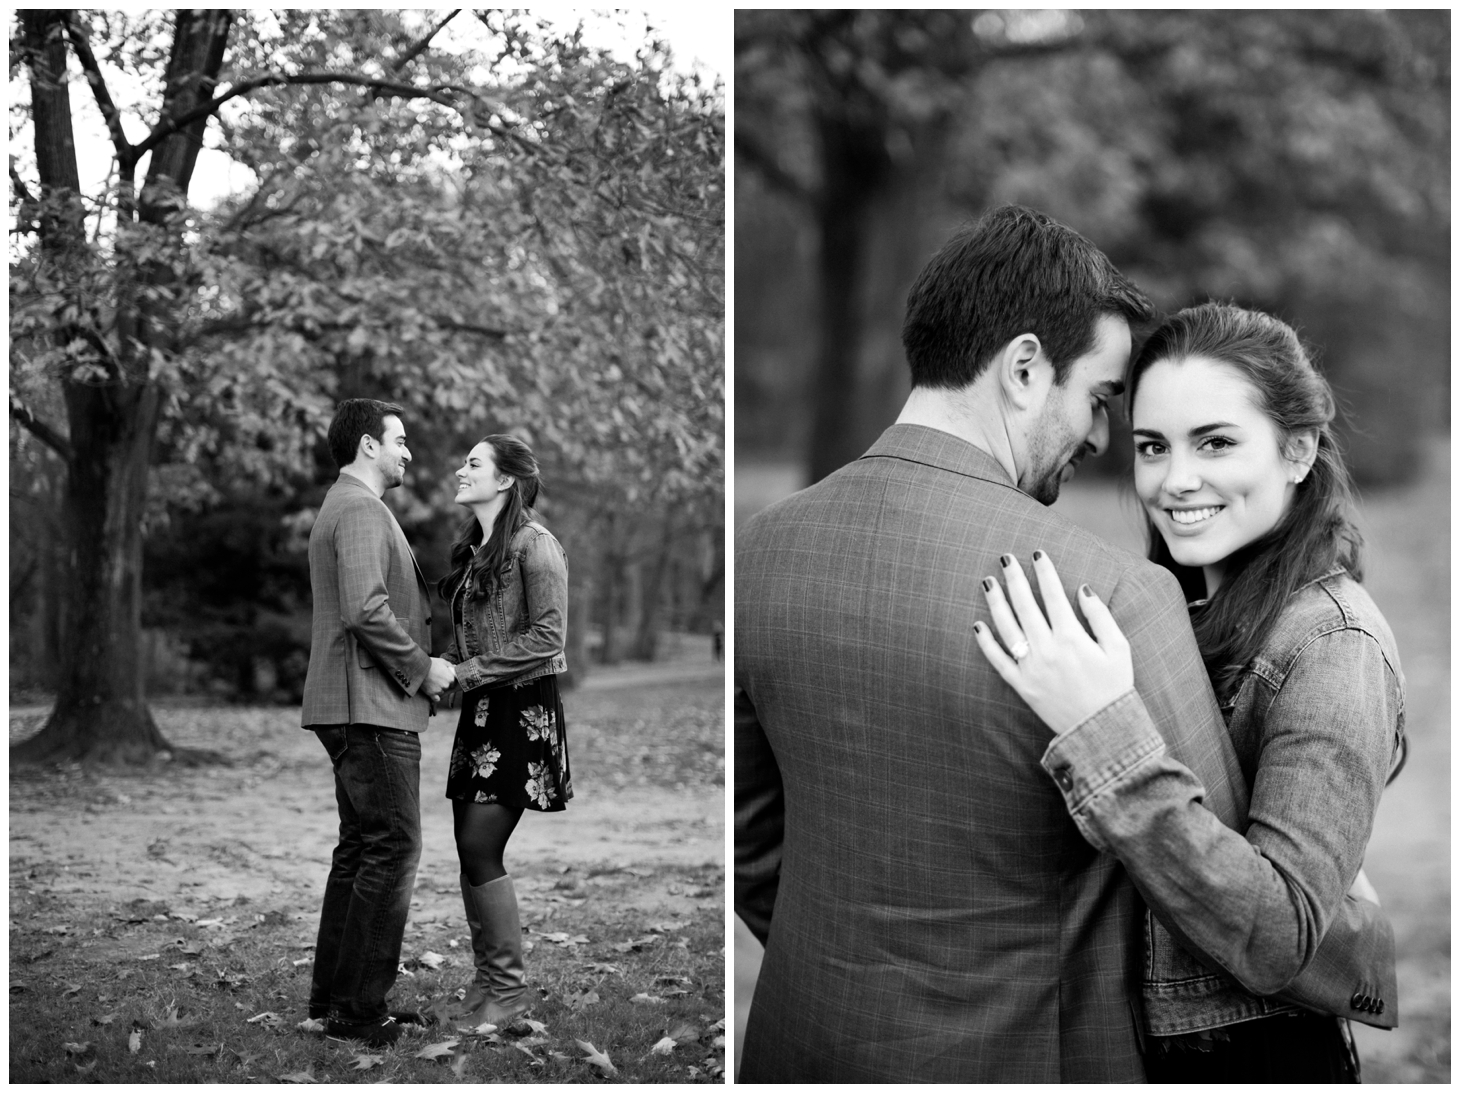 Winter engagement session at Peirce Mill Park in Washington, DC by Sarah Bradshaw Photography